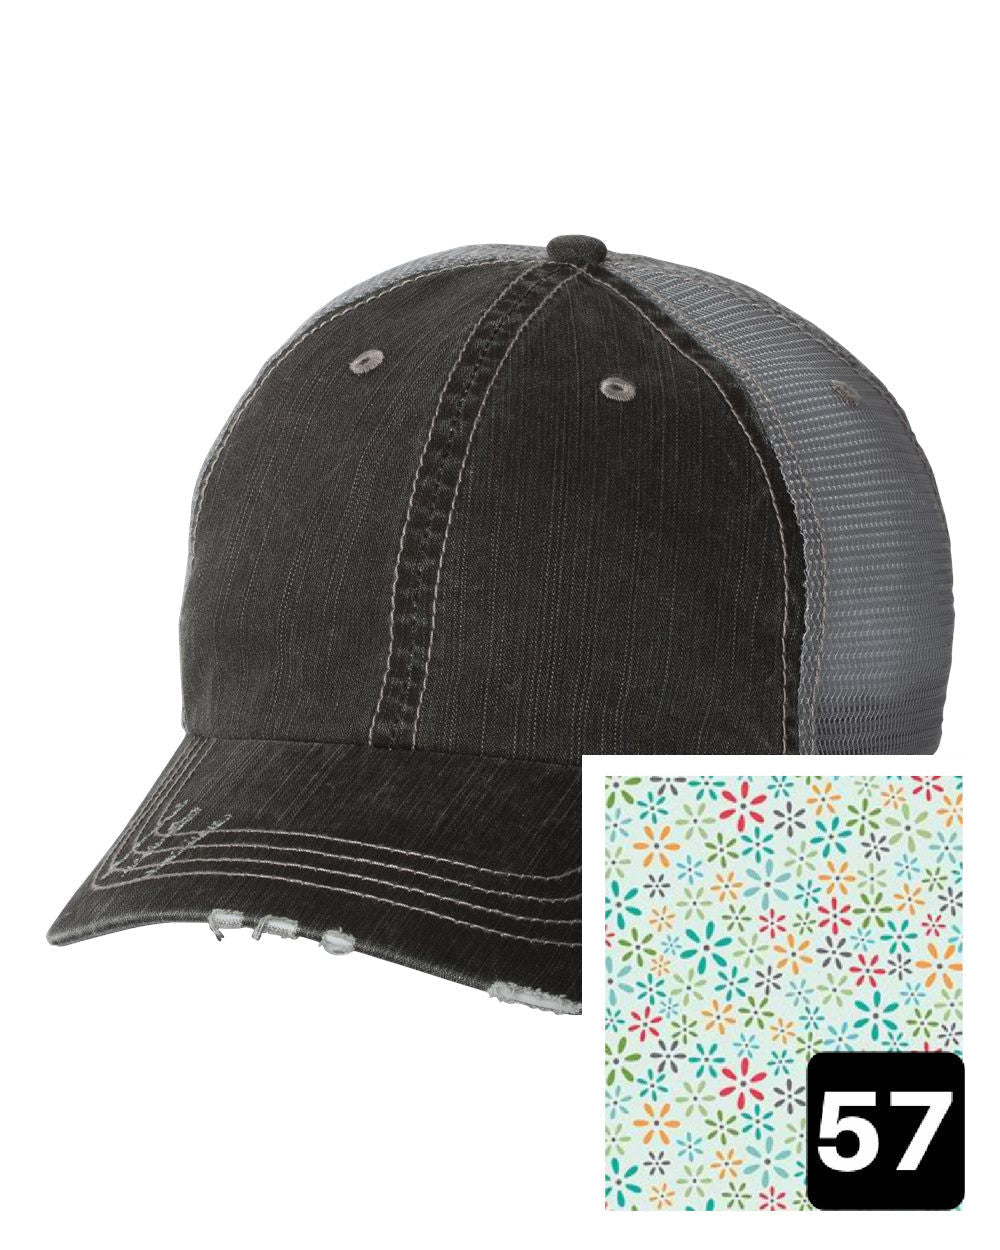 gray distressed trucker hat with white daisy on yellow fabric state of Minnesota